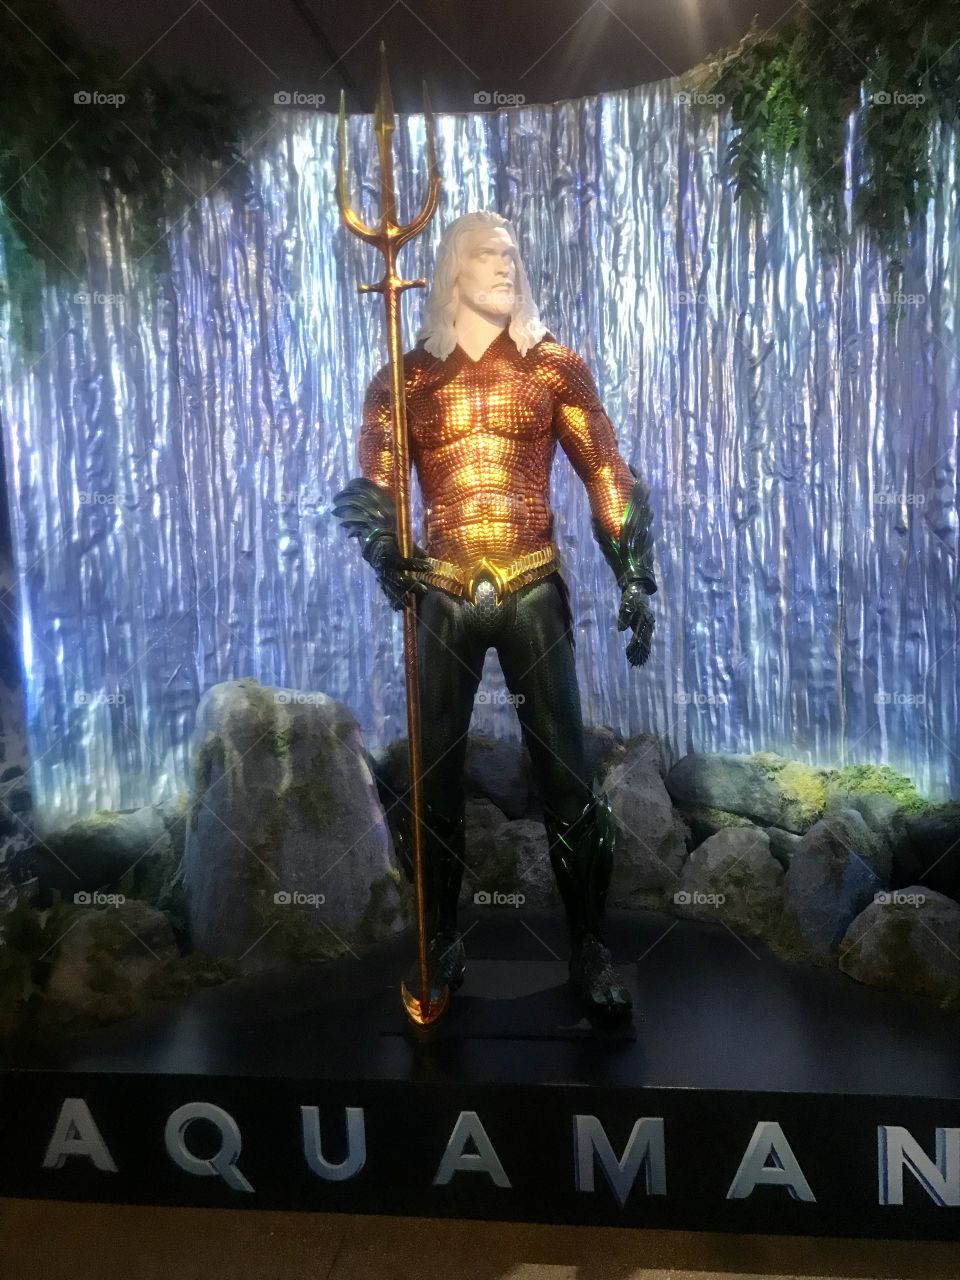 Aqua man costume from the original movies worn by the actor, seen on warner brothers studio tour